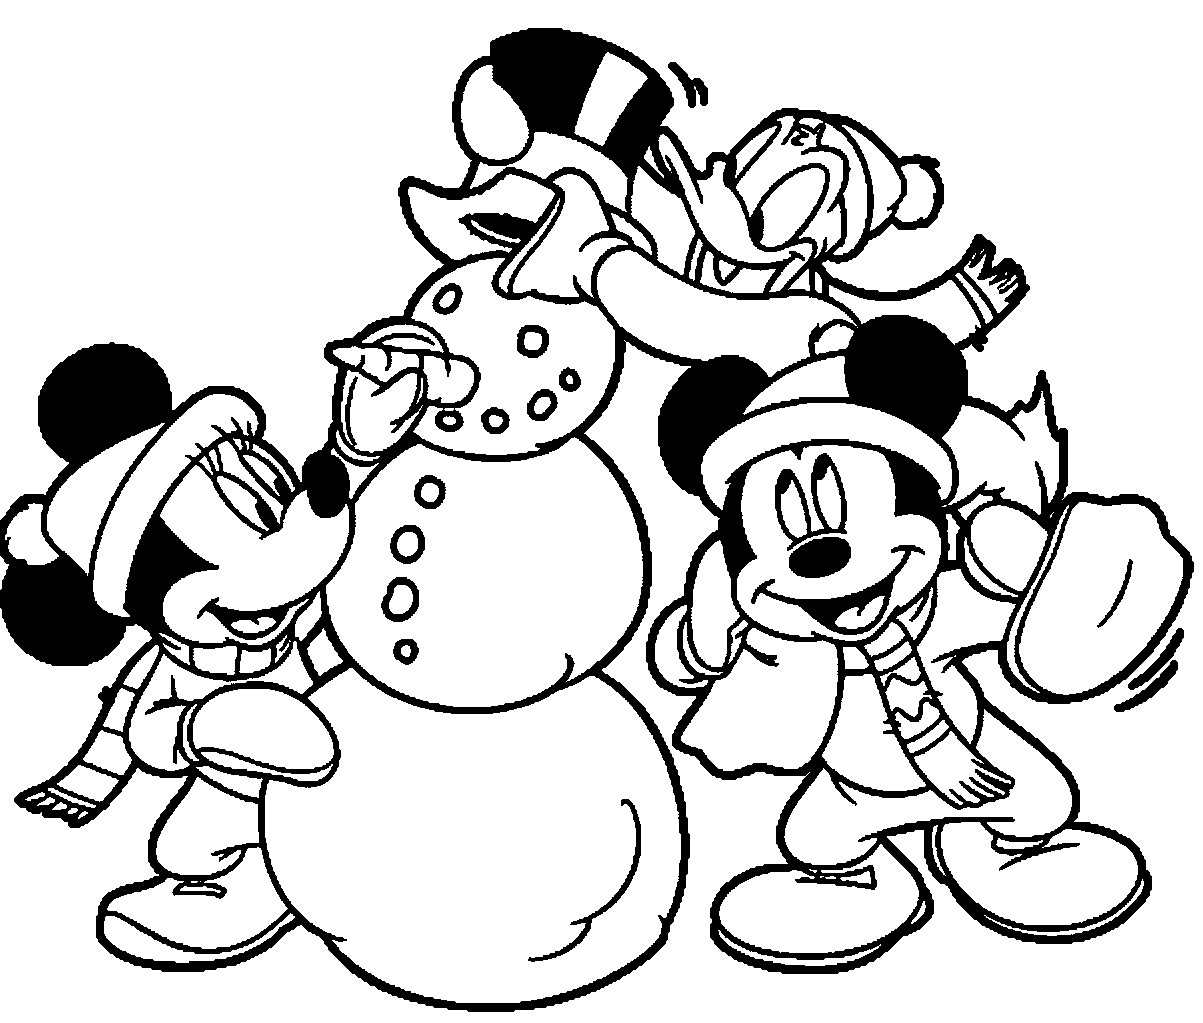 Winter Coloring Sheets For Kids
 Winter Coloring Pages